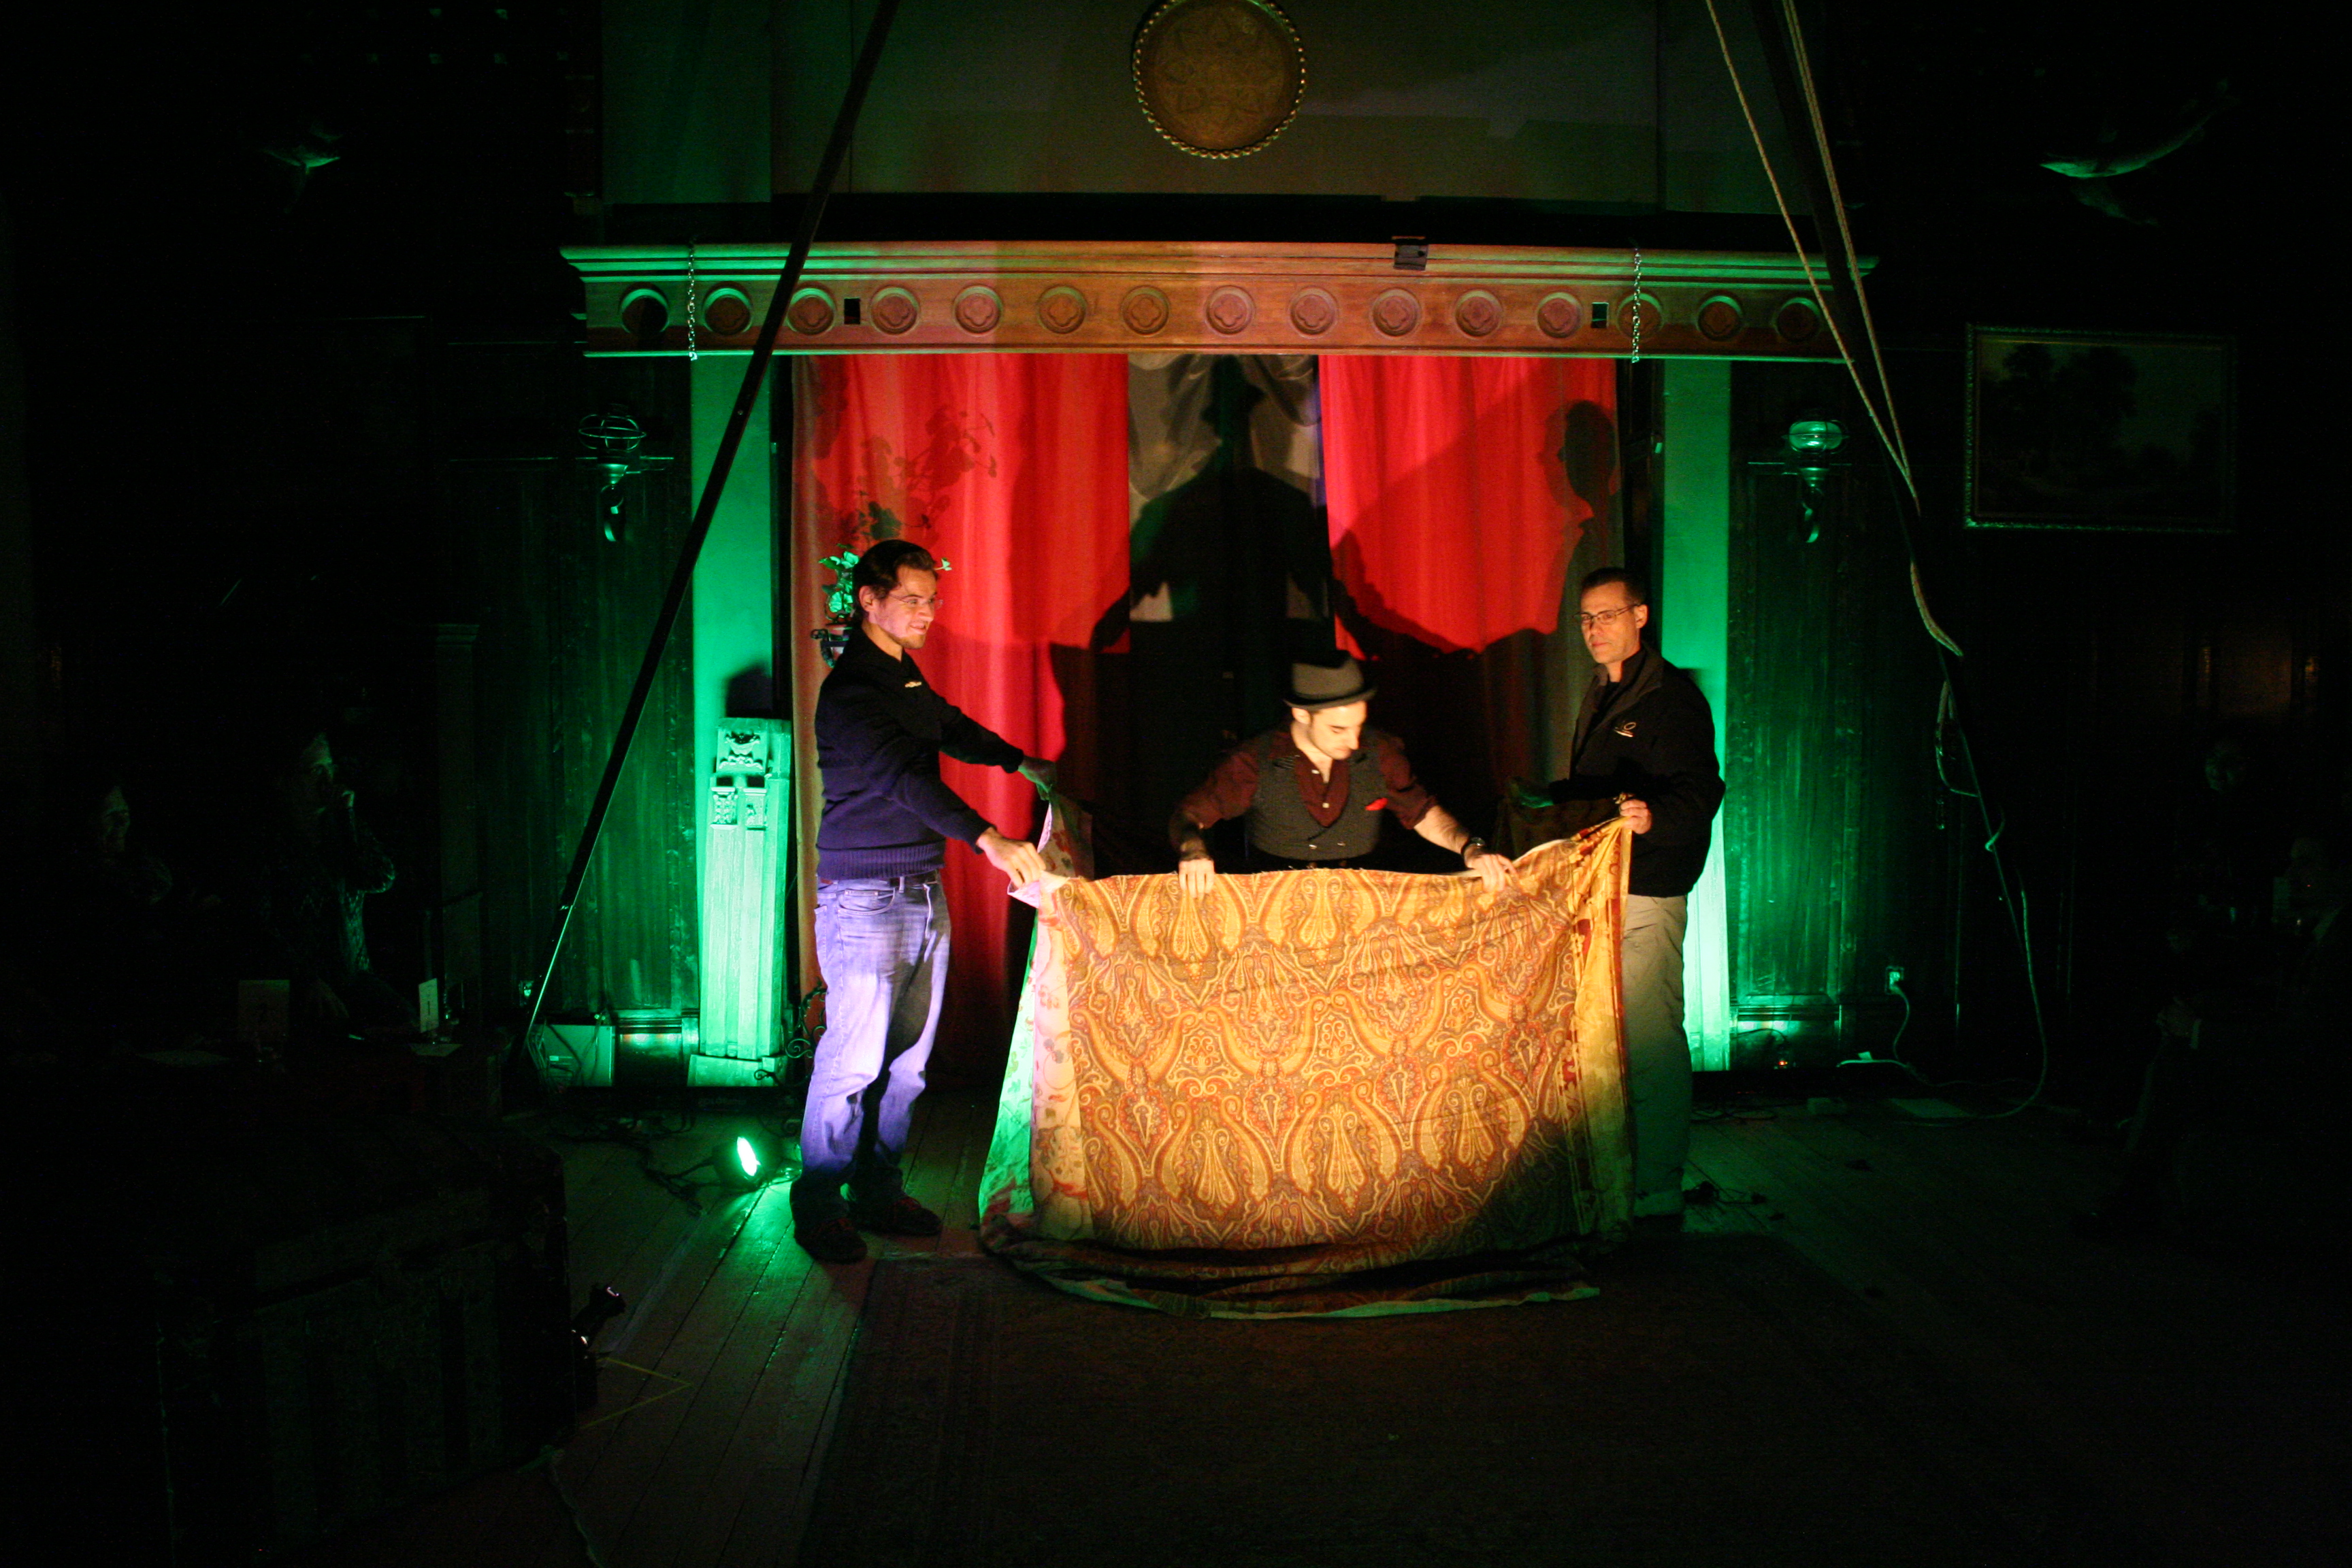 Magician stands with volunteers and a large curtain.